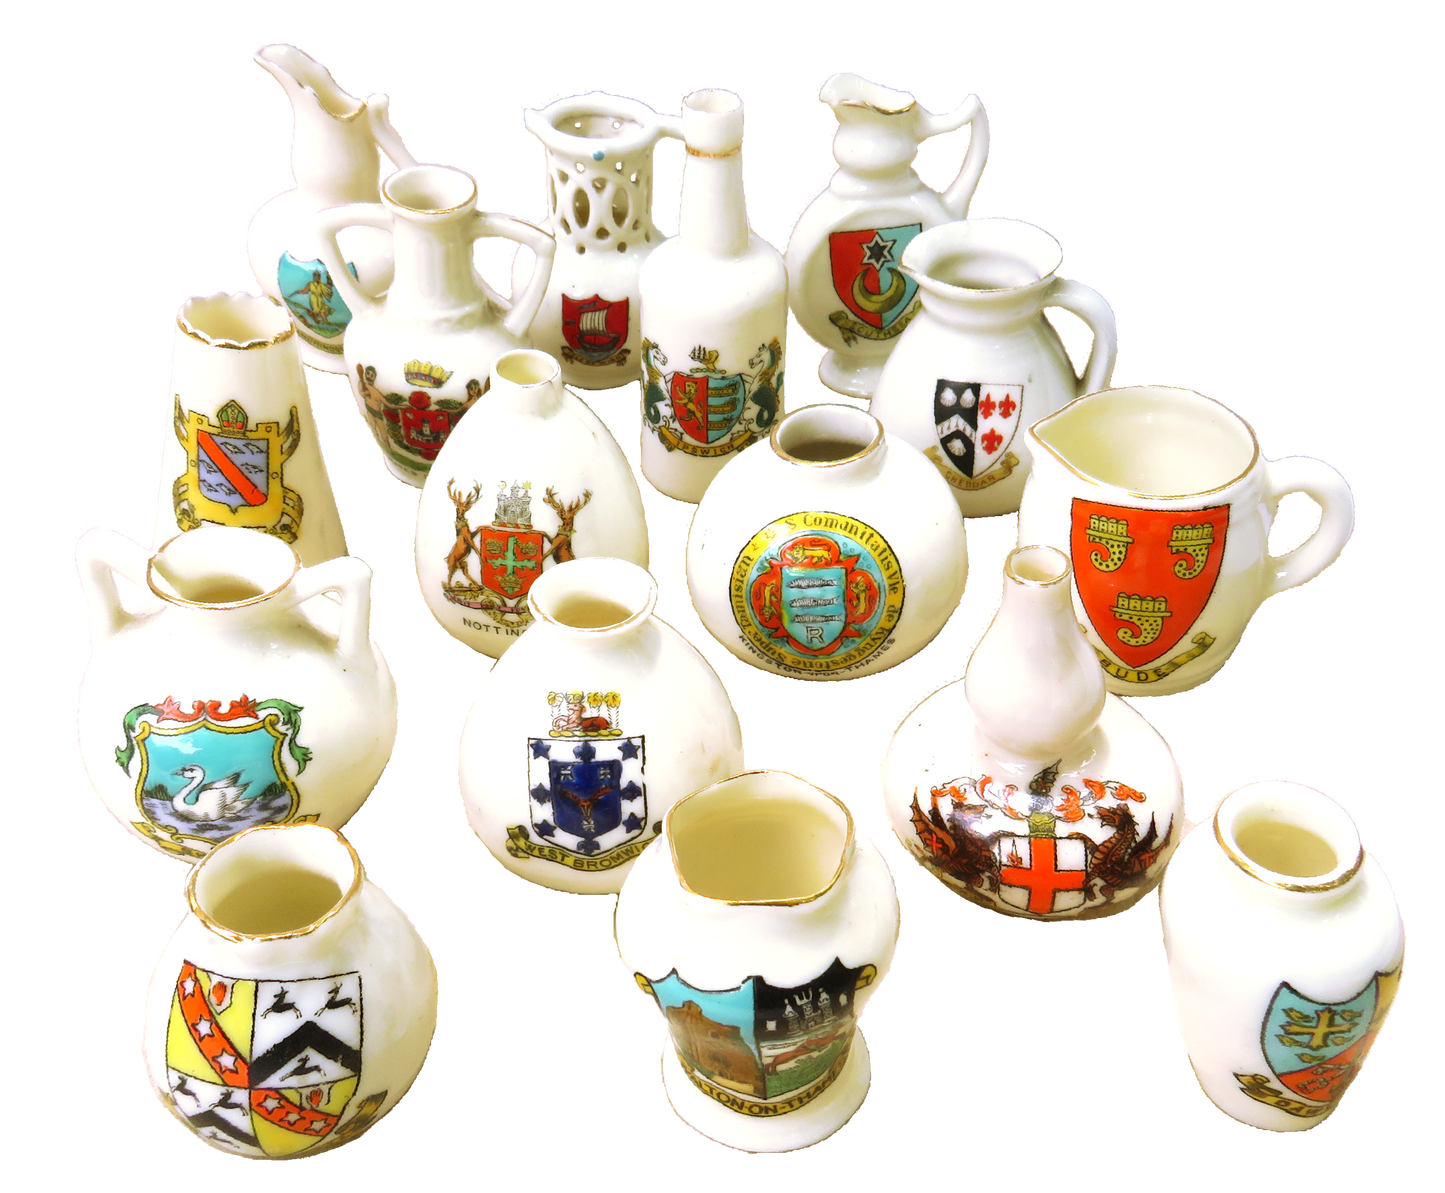 Antique English Heraldic / Crested Ware Staffordshire Miniature Porcelain Collection, Set of 16